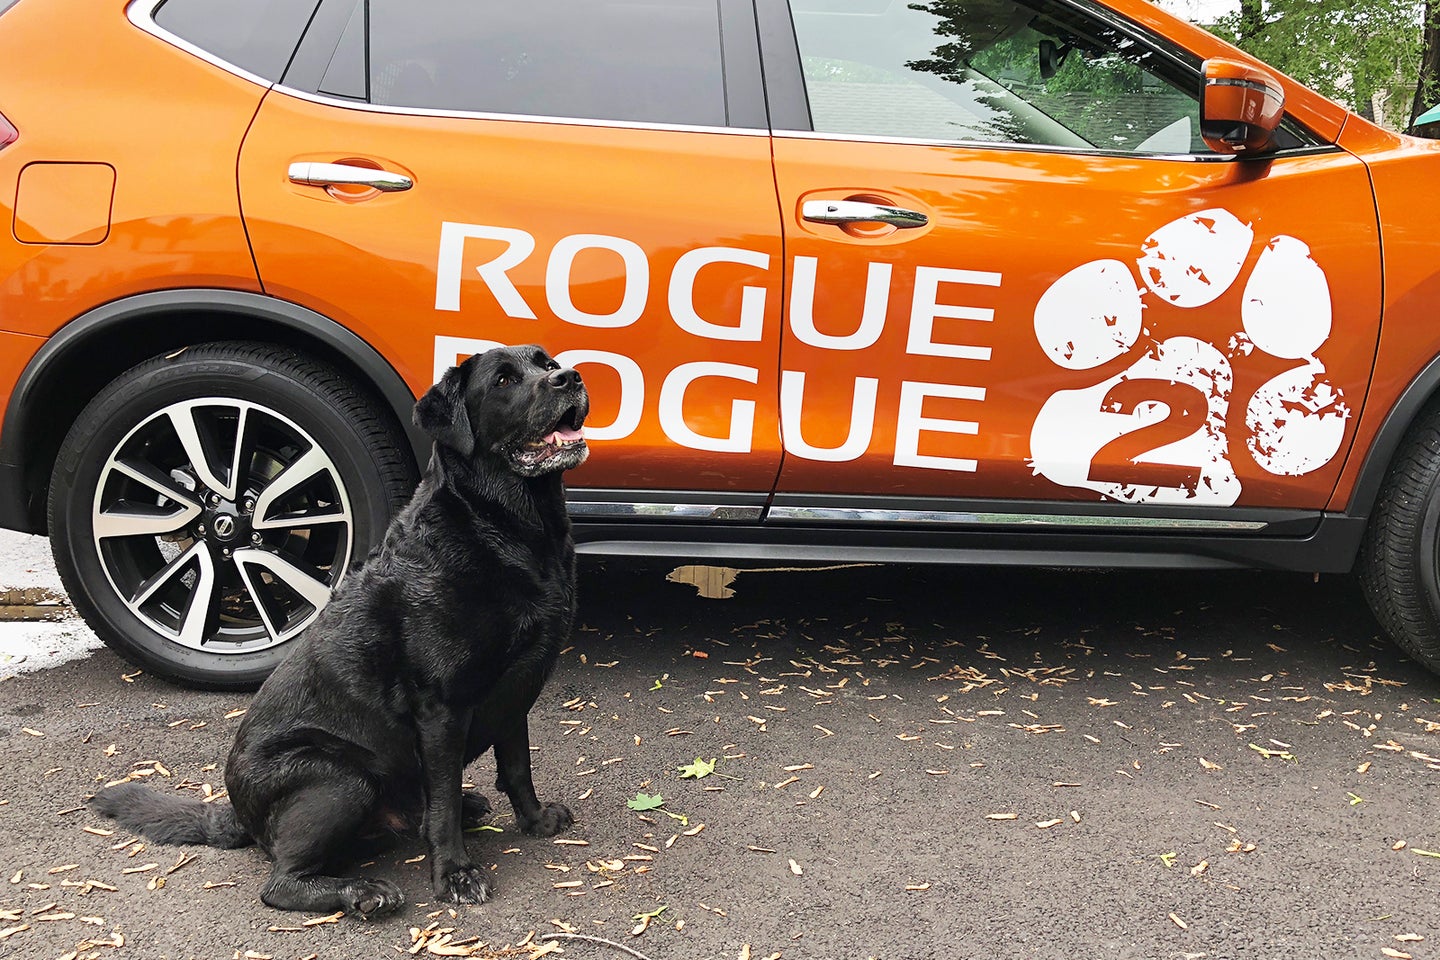 The Nissan Rogue Dogue 2 Is a Cute, If Unexceptional, Concept